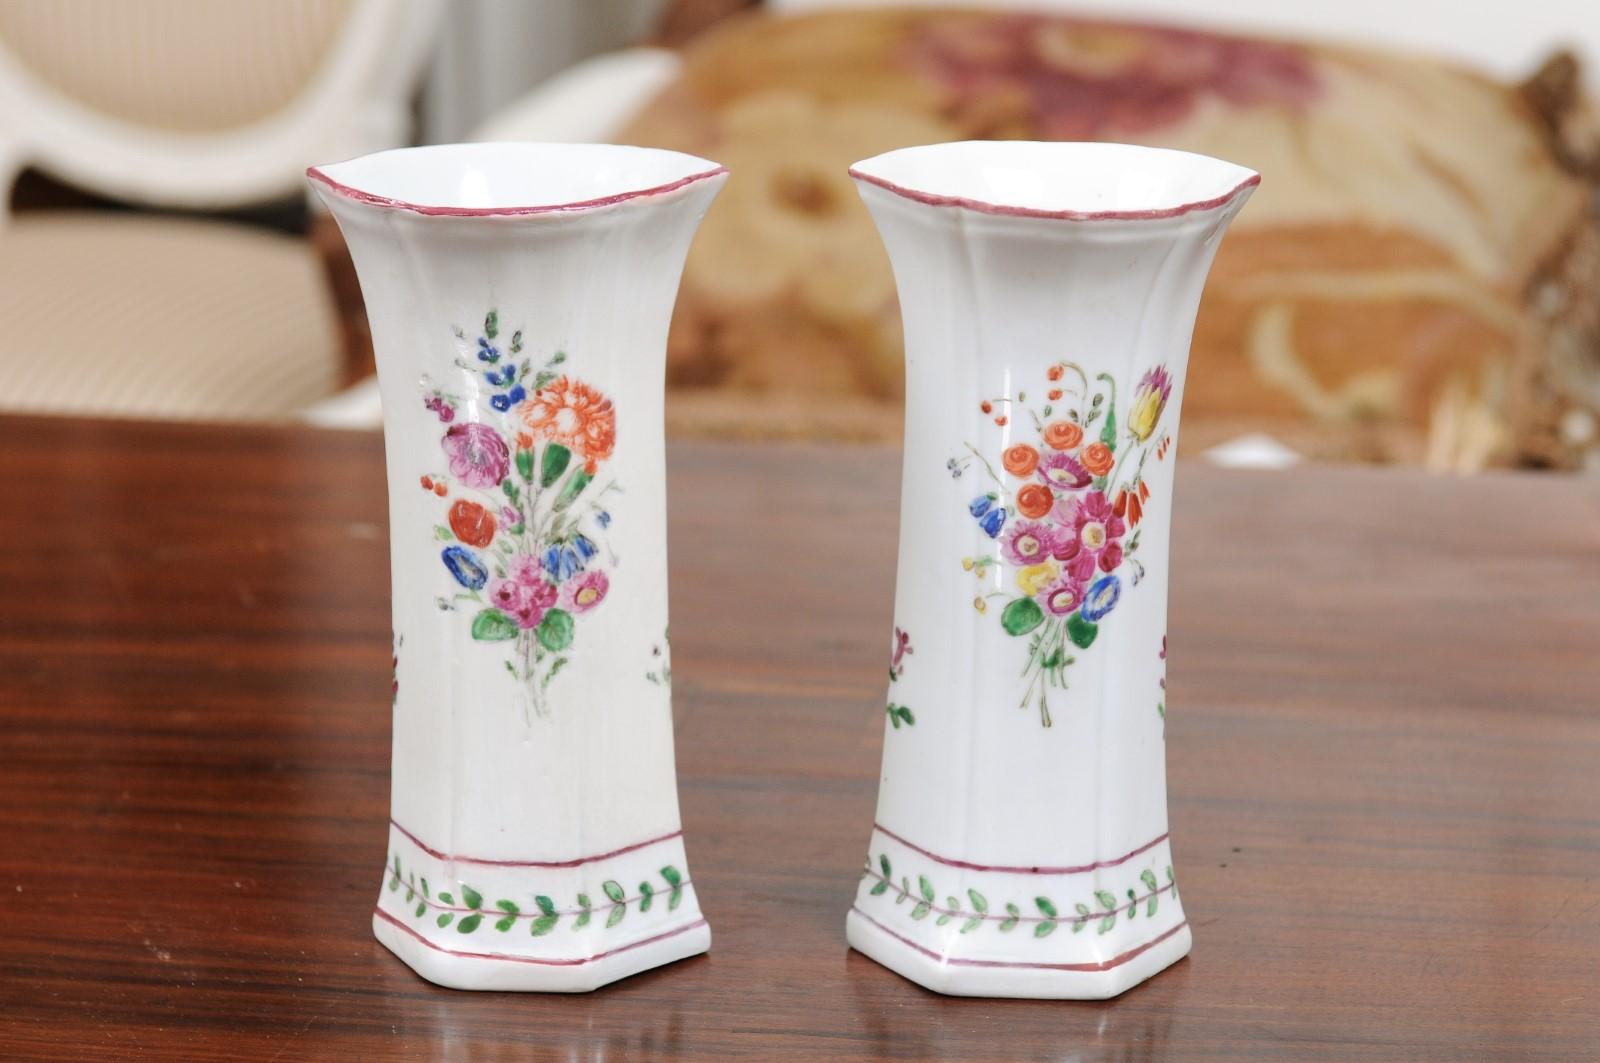 Pair of Italian Porcelain Vases with Colorful Painted Floral Motifs, circa 1805 For Sale 7